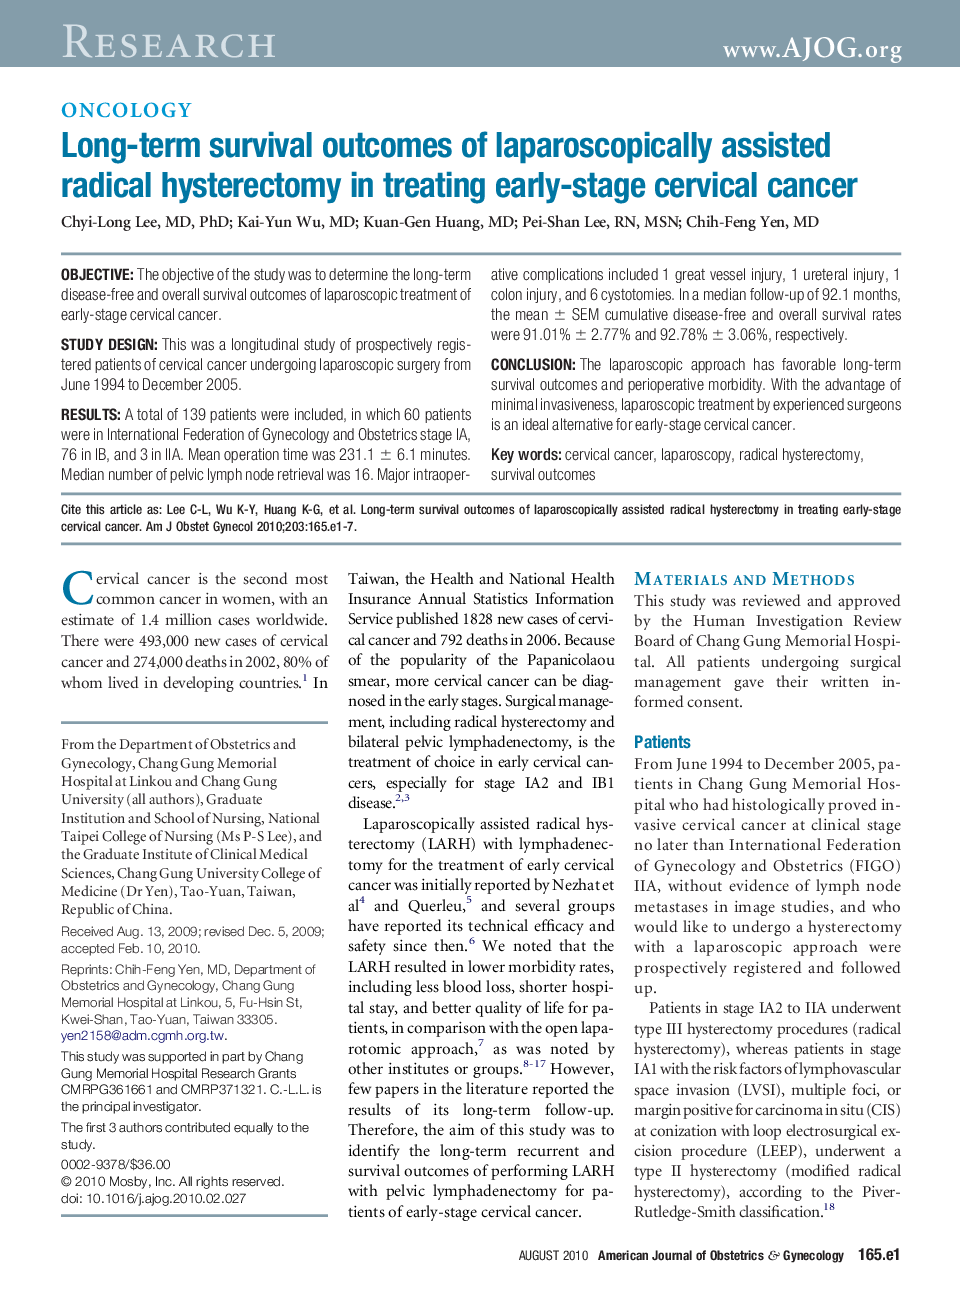 Long-term survival outcomes of laparoscopically assisted radical hysterectomy in treating early-stage cervical cancer